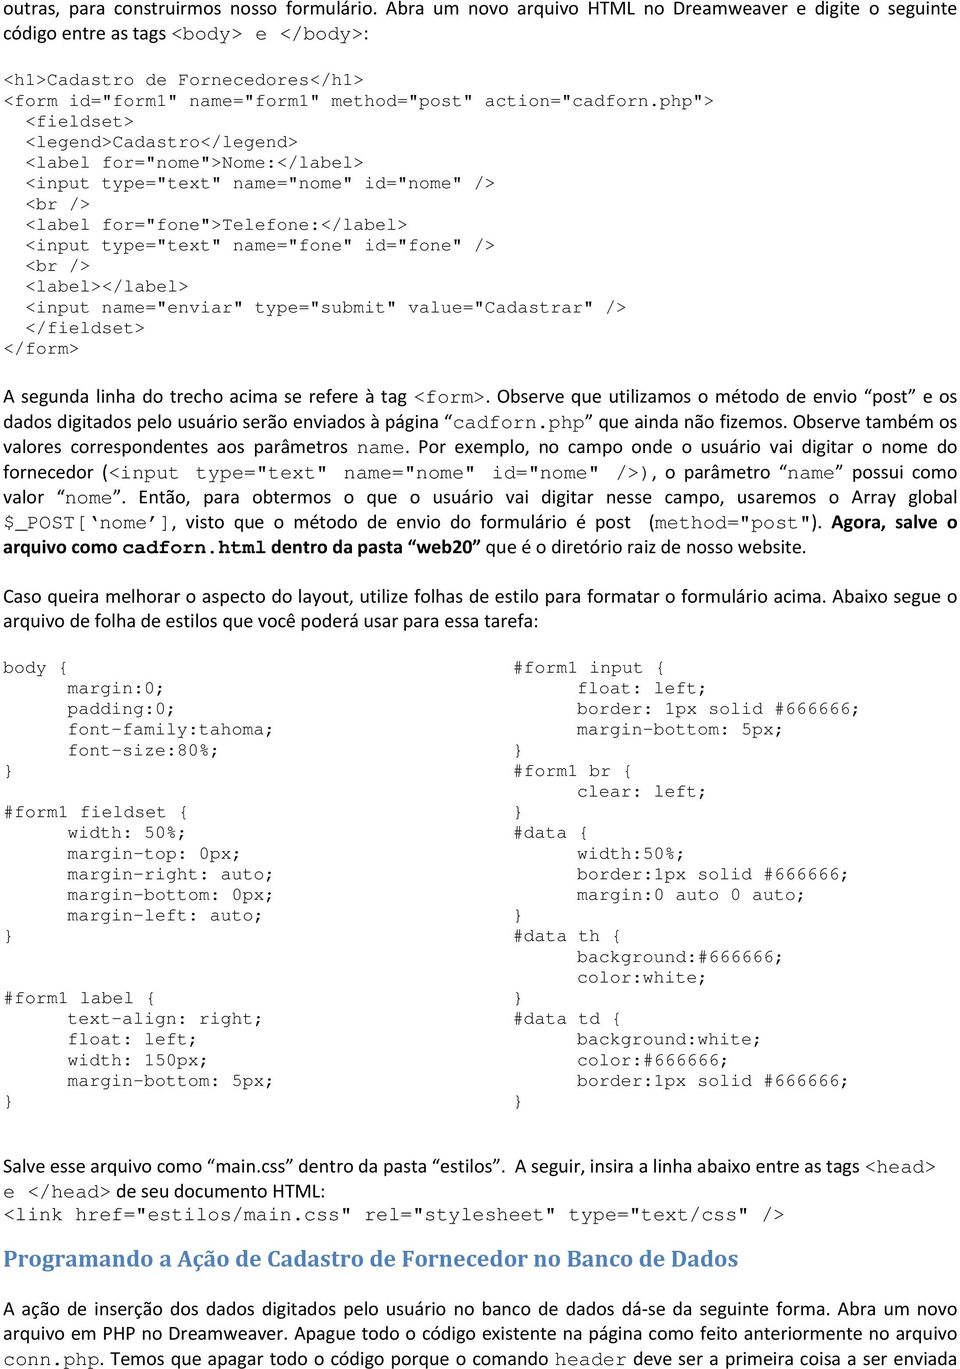 php"> <fieldset> <legend>cadastro</legend> <label for="nome">nome:</label> <input type="text" name="nome" id="nome" /> <br /> <label for="fone">telefone:</label> <input type="text" name="fone"